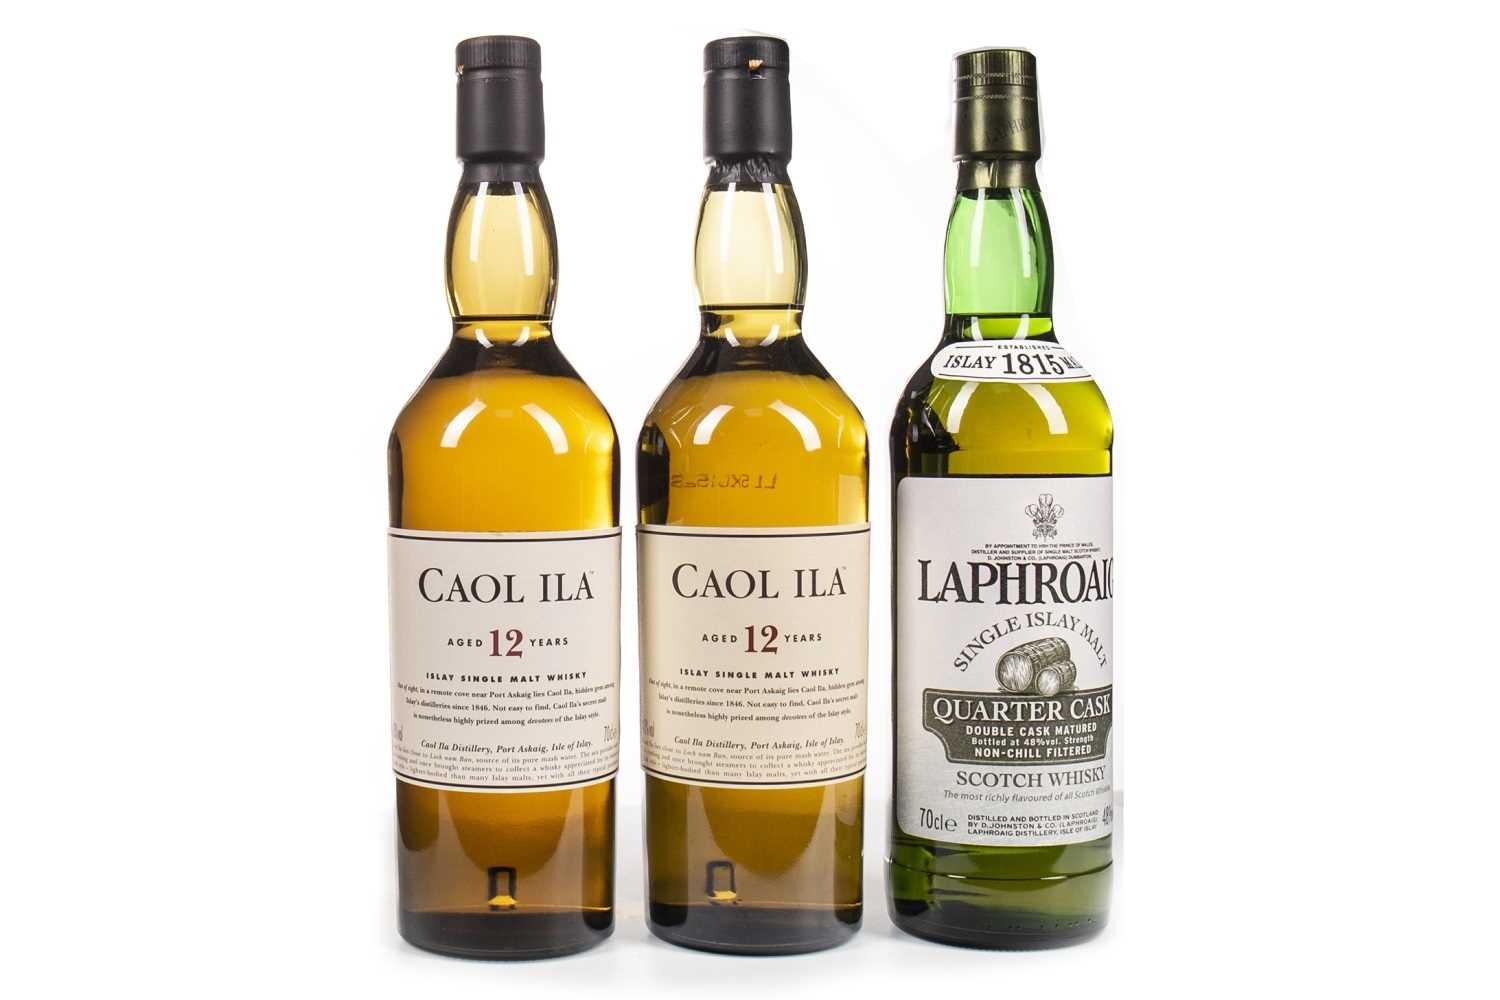 Lot 334 - TWO BOTTLES OF CAOL ILA AGED 12 YEARS AND LAPHROAIG QUARTER CASK